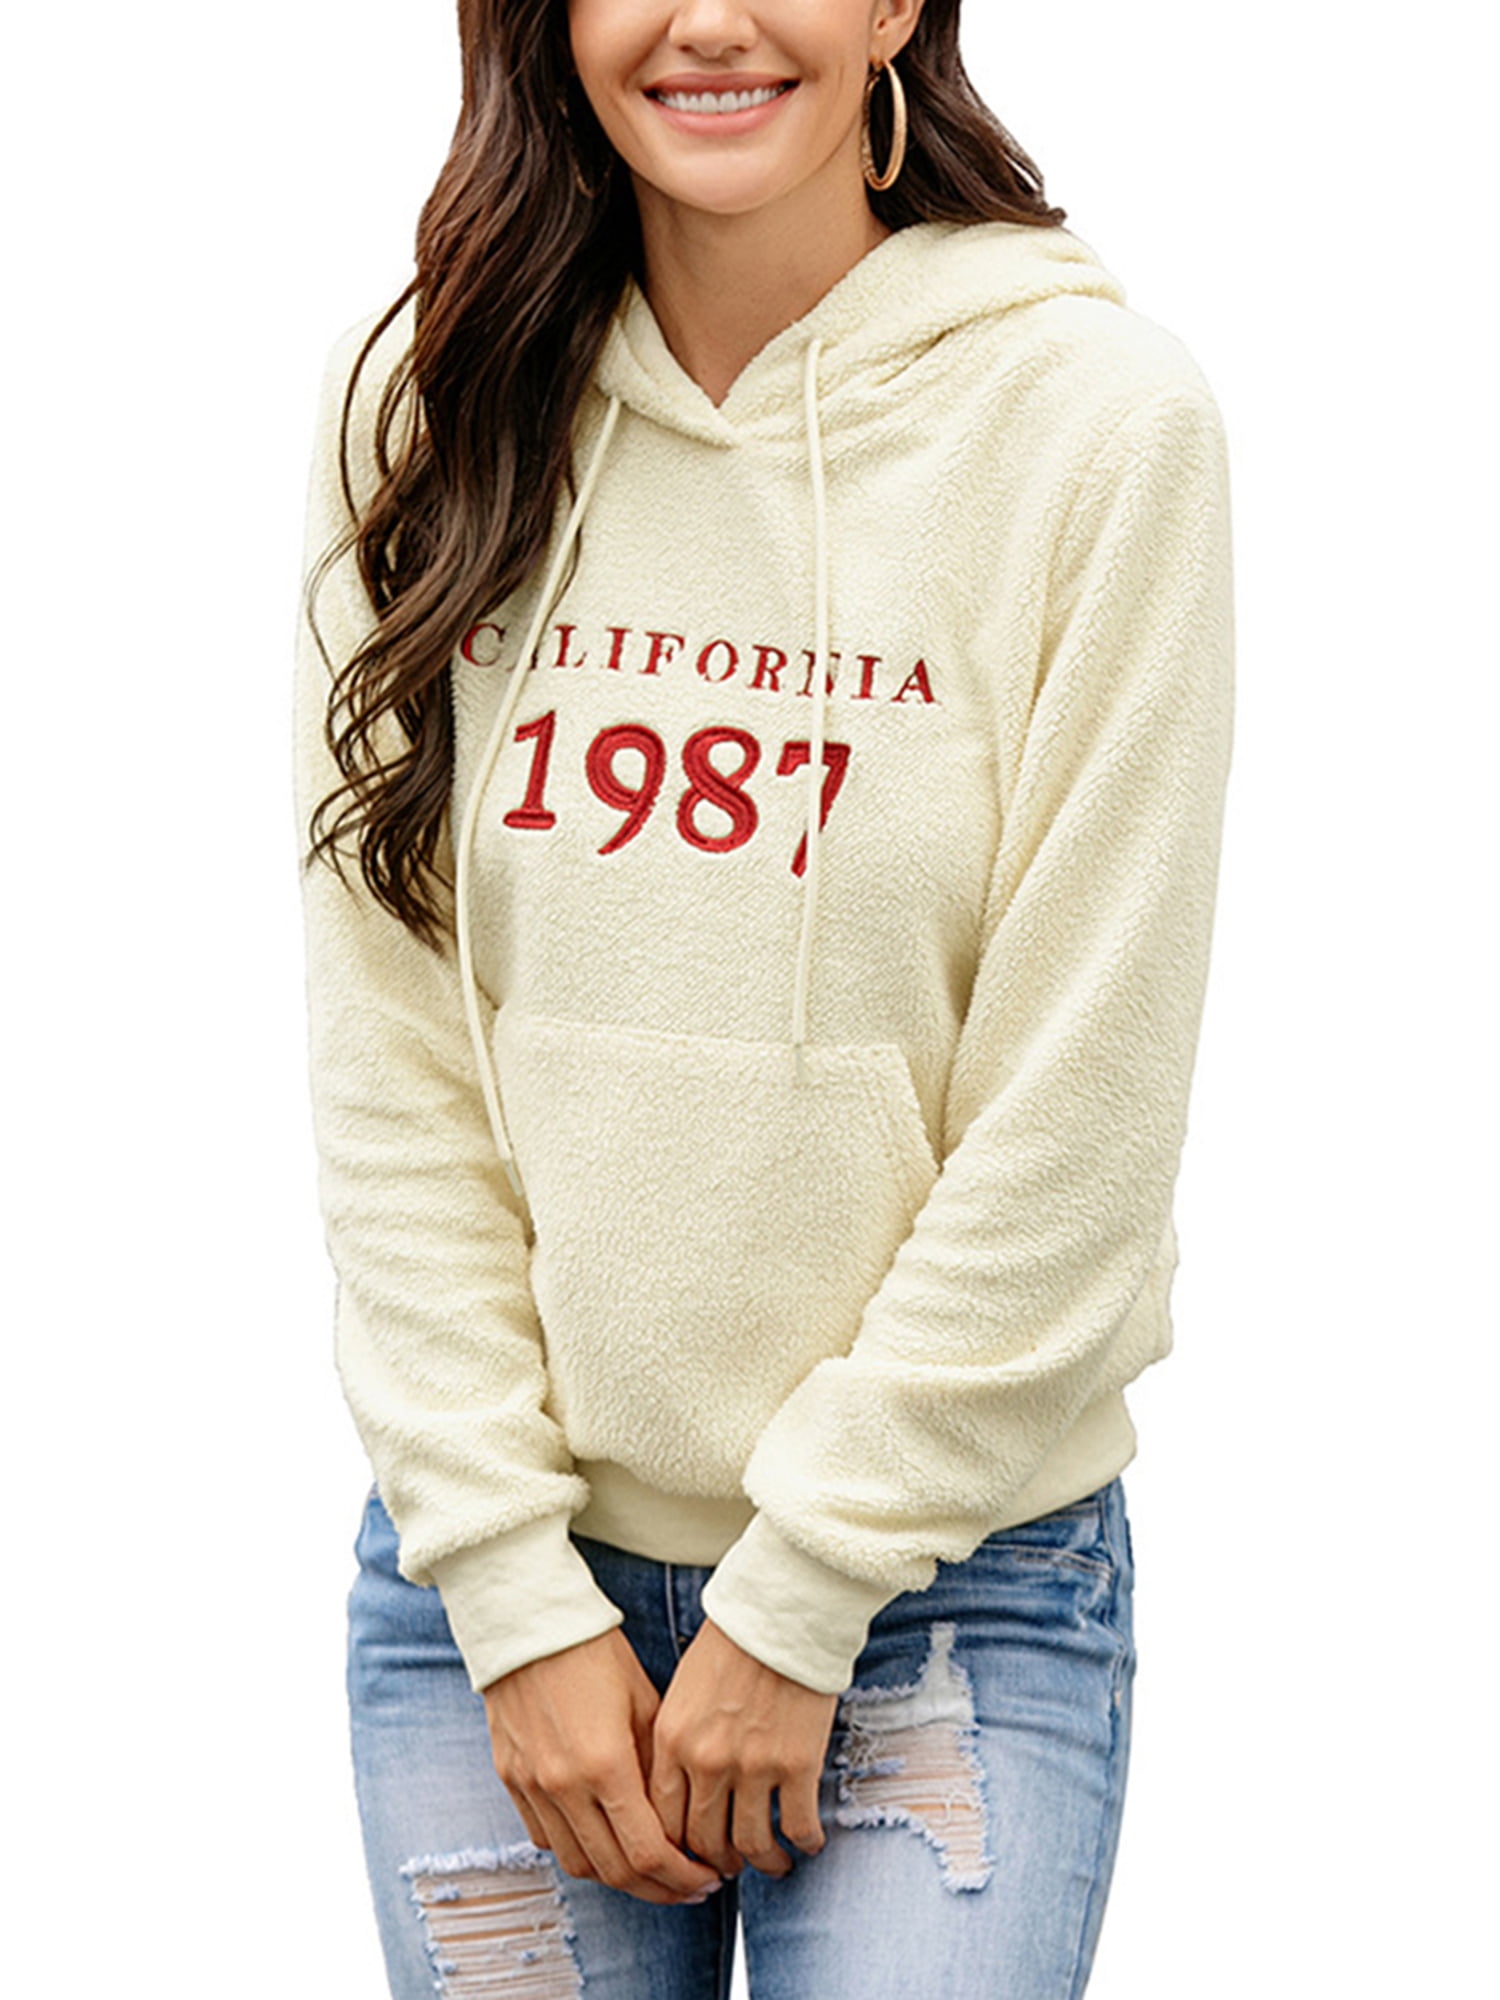 Domple Women Rose Loose Fit Embroidery Casual Letter Print Pullover Hoodies Sweatshirt